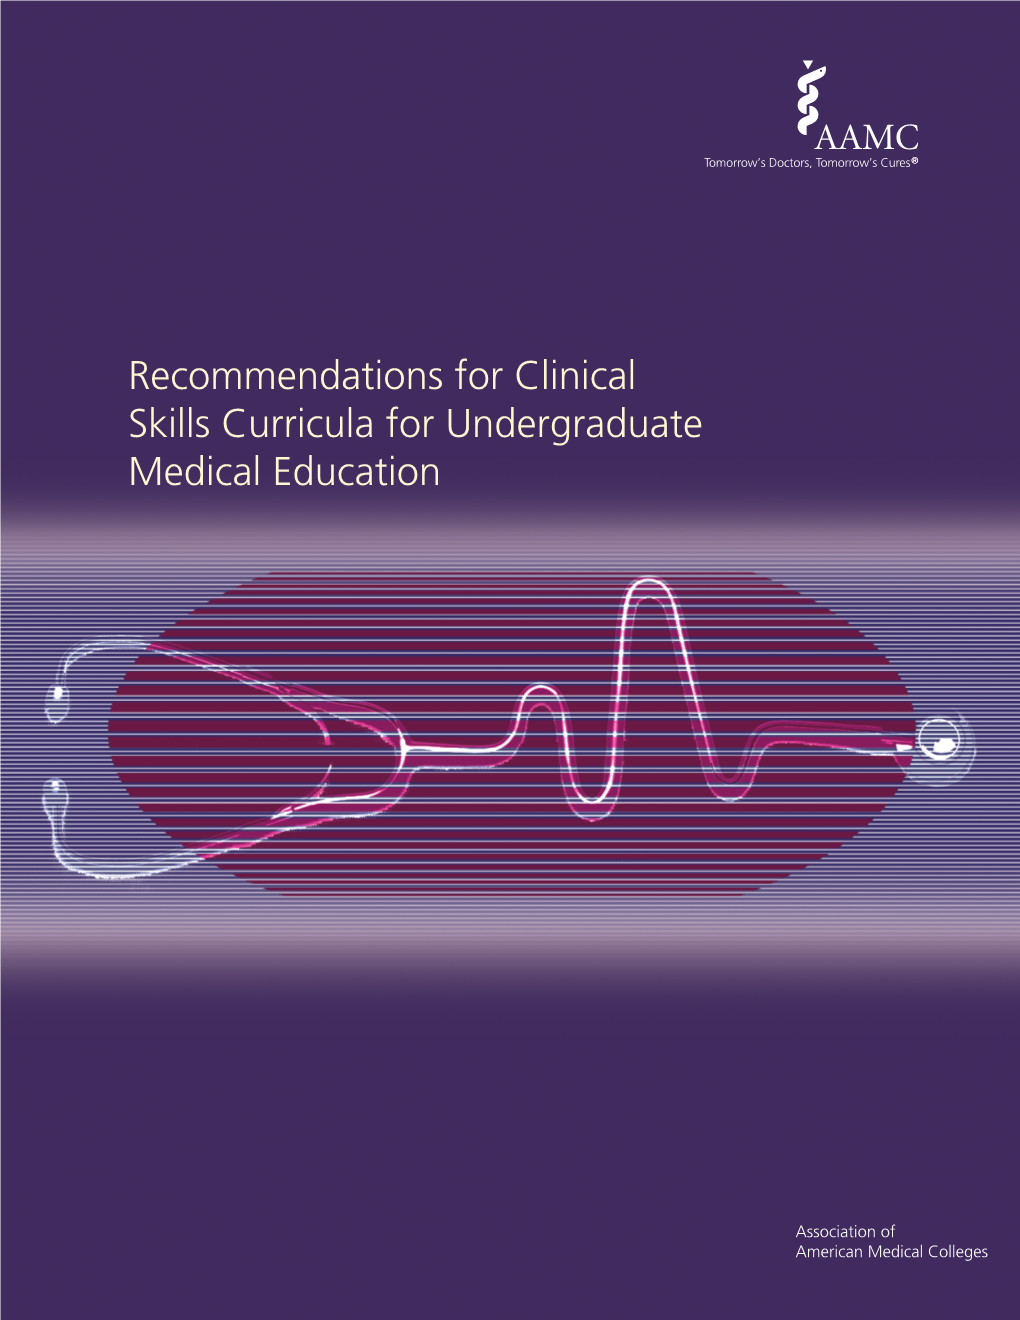 Recommendations for Clinical Skills Curricula for Undergraduate Medical Education